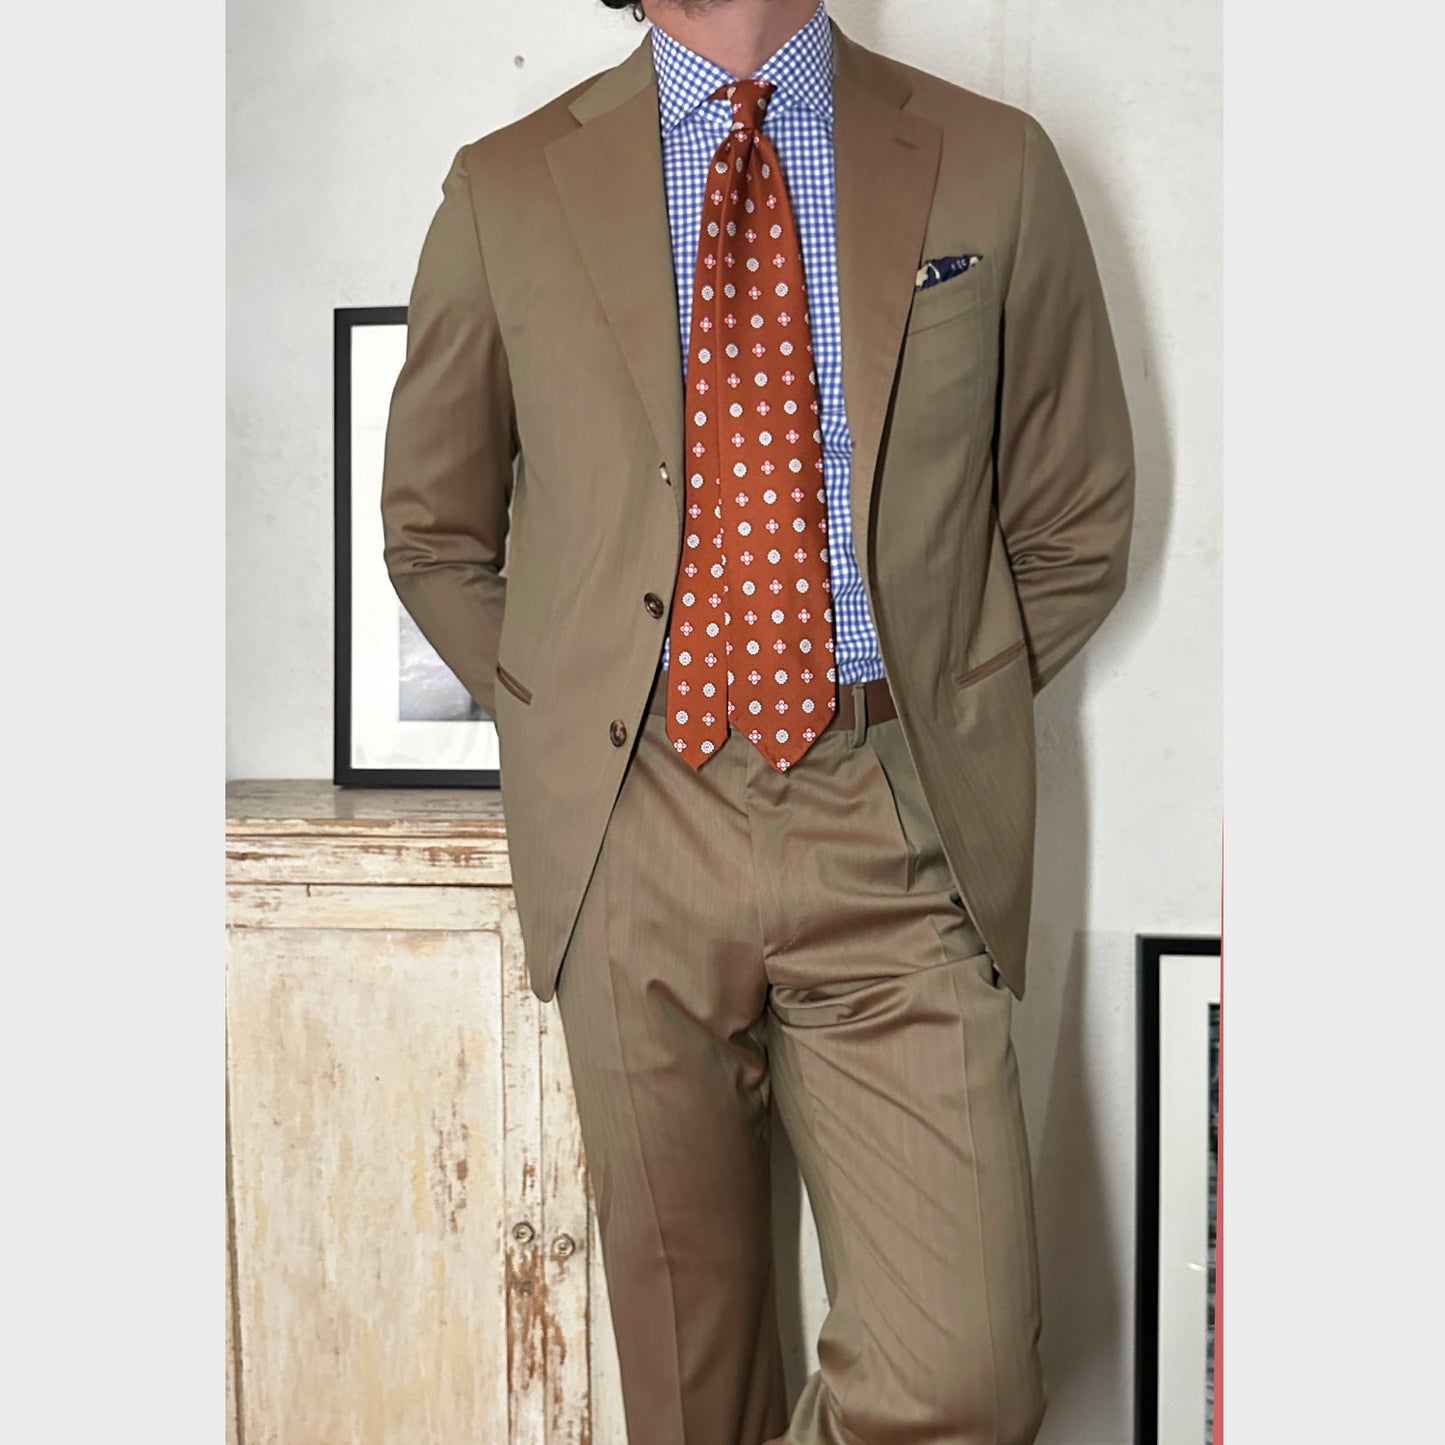 Solaro Suit Loro Piana Wool Super 130's Caruso. Tailored solaro suit, made with super 130's wool by Ing. Loro Piana, unlined, made in Italy by Caruso, classic fit drop 7, iconic color tabacco brown.